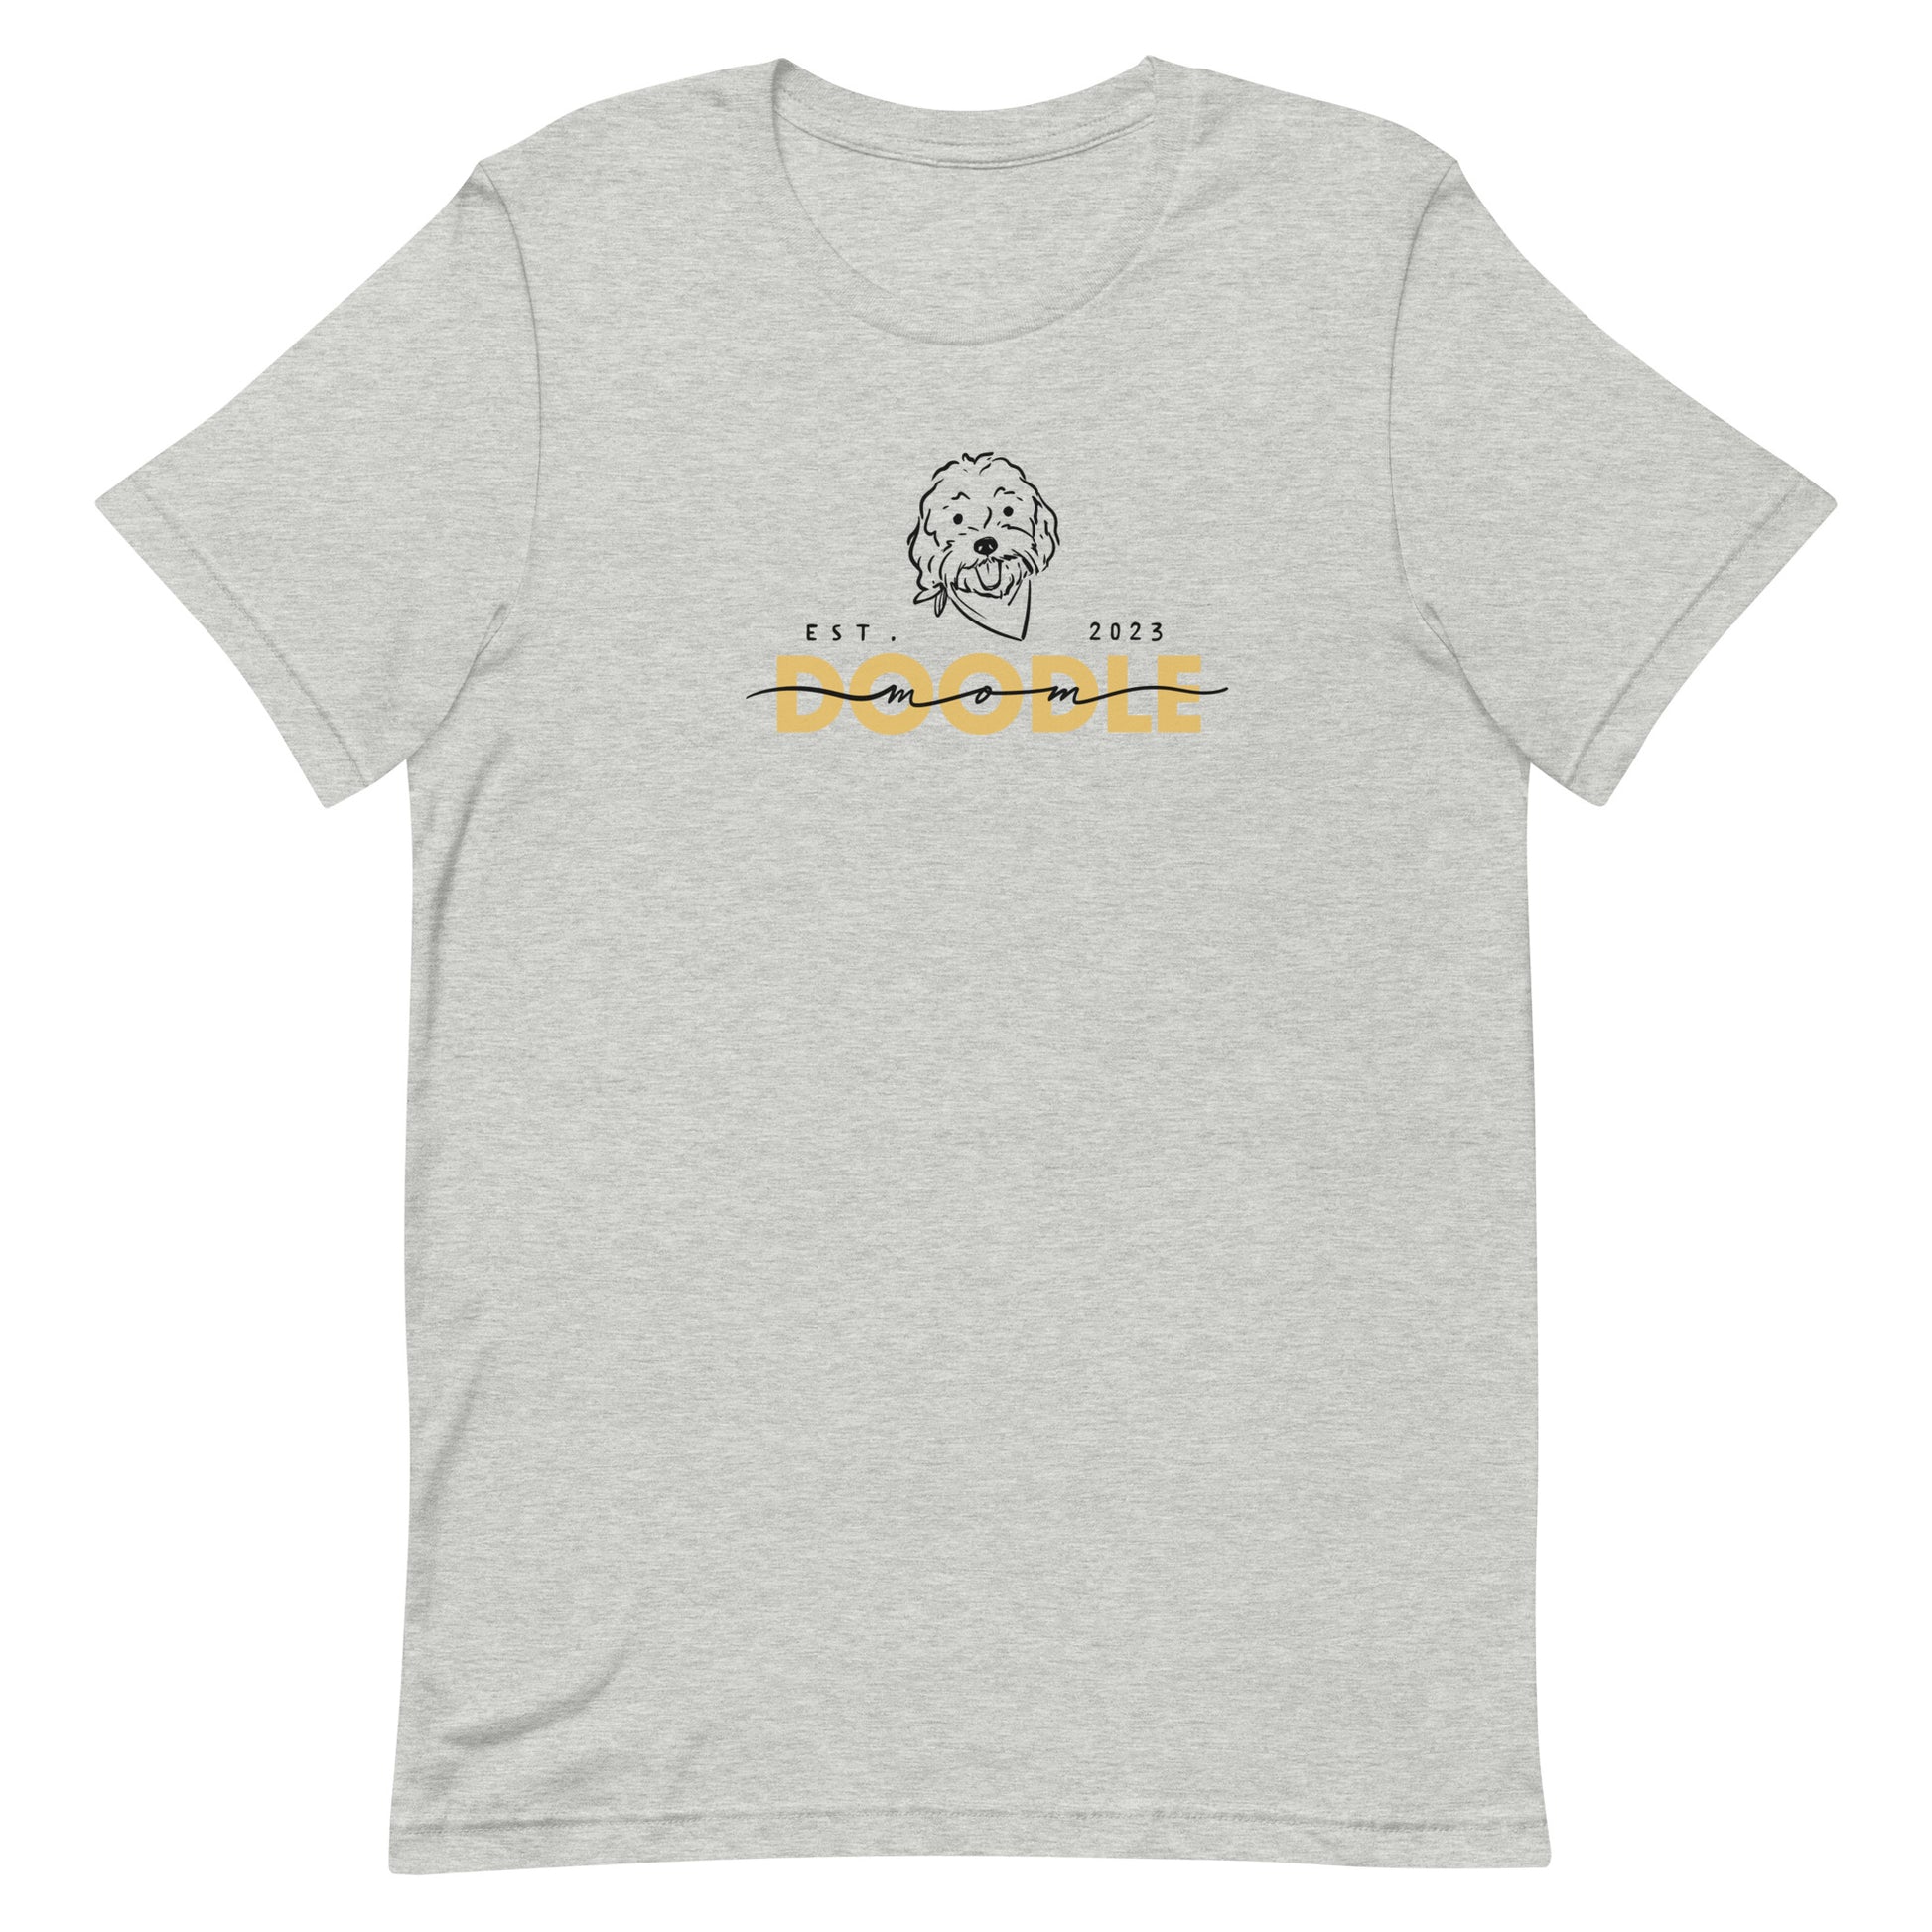 Goldendoodle Mom t-shirt with Goldendoodle face and words "Doodle Mom Est 2023" in athletic gray color